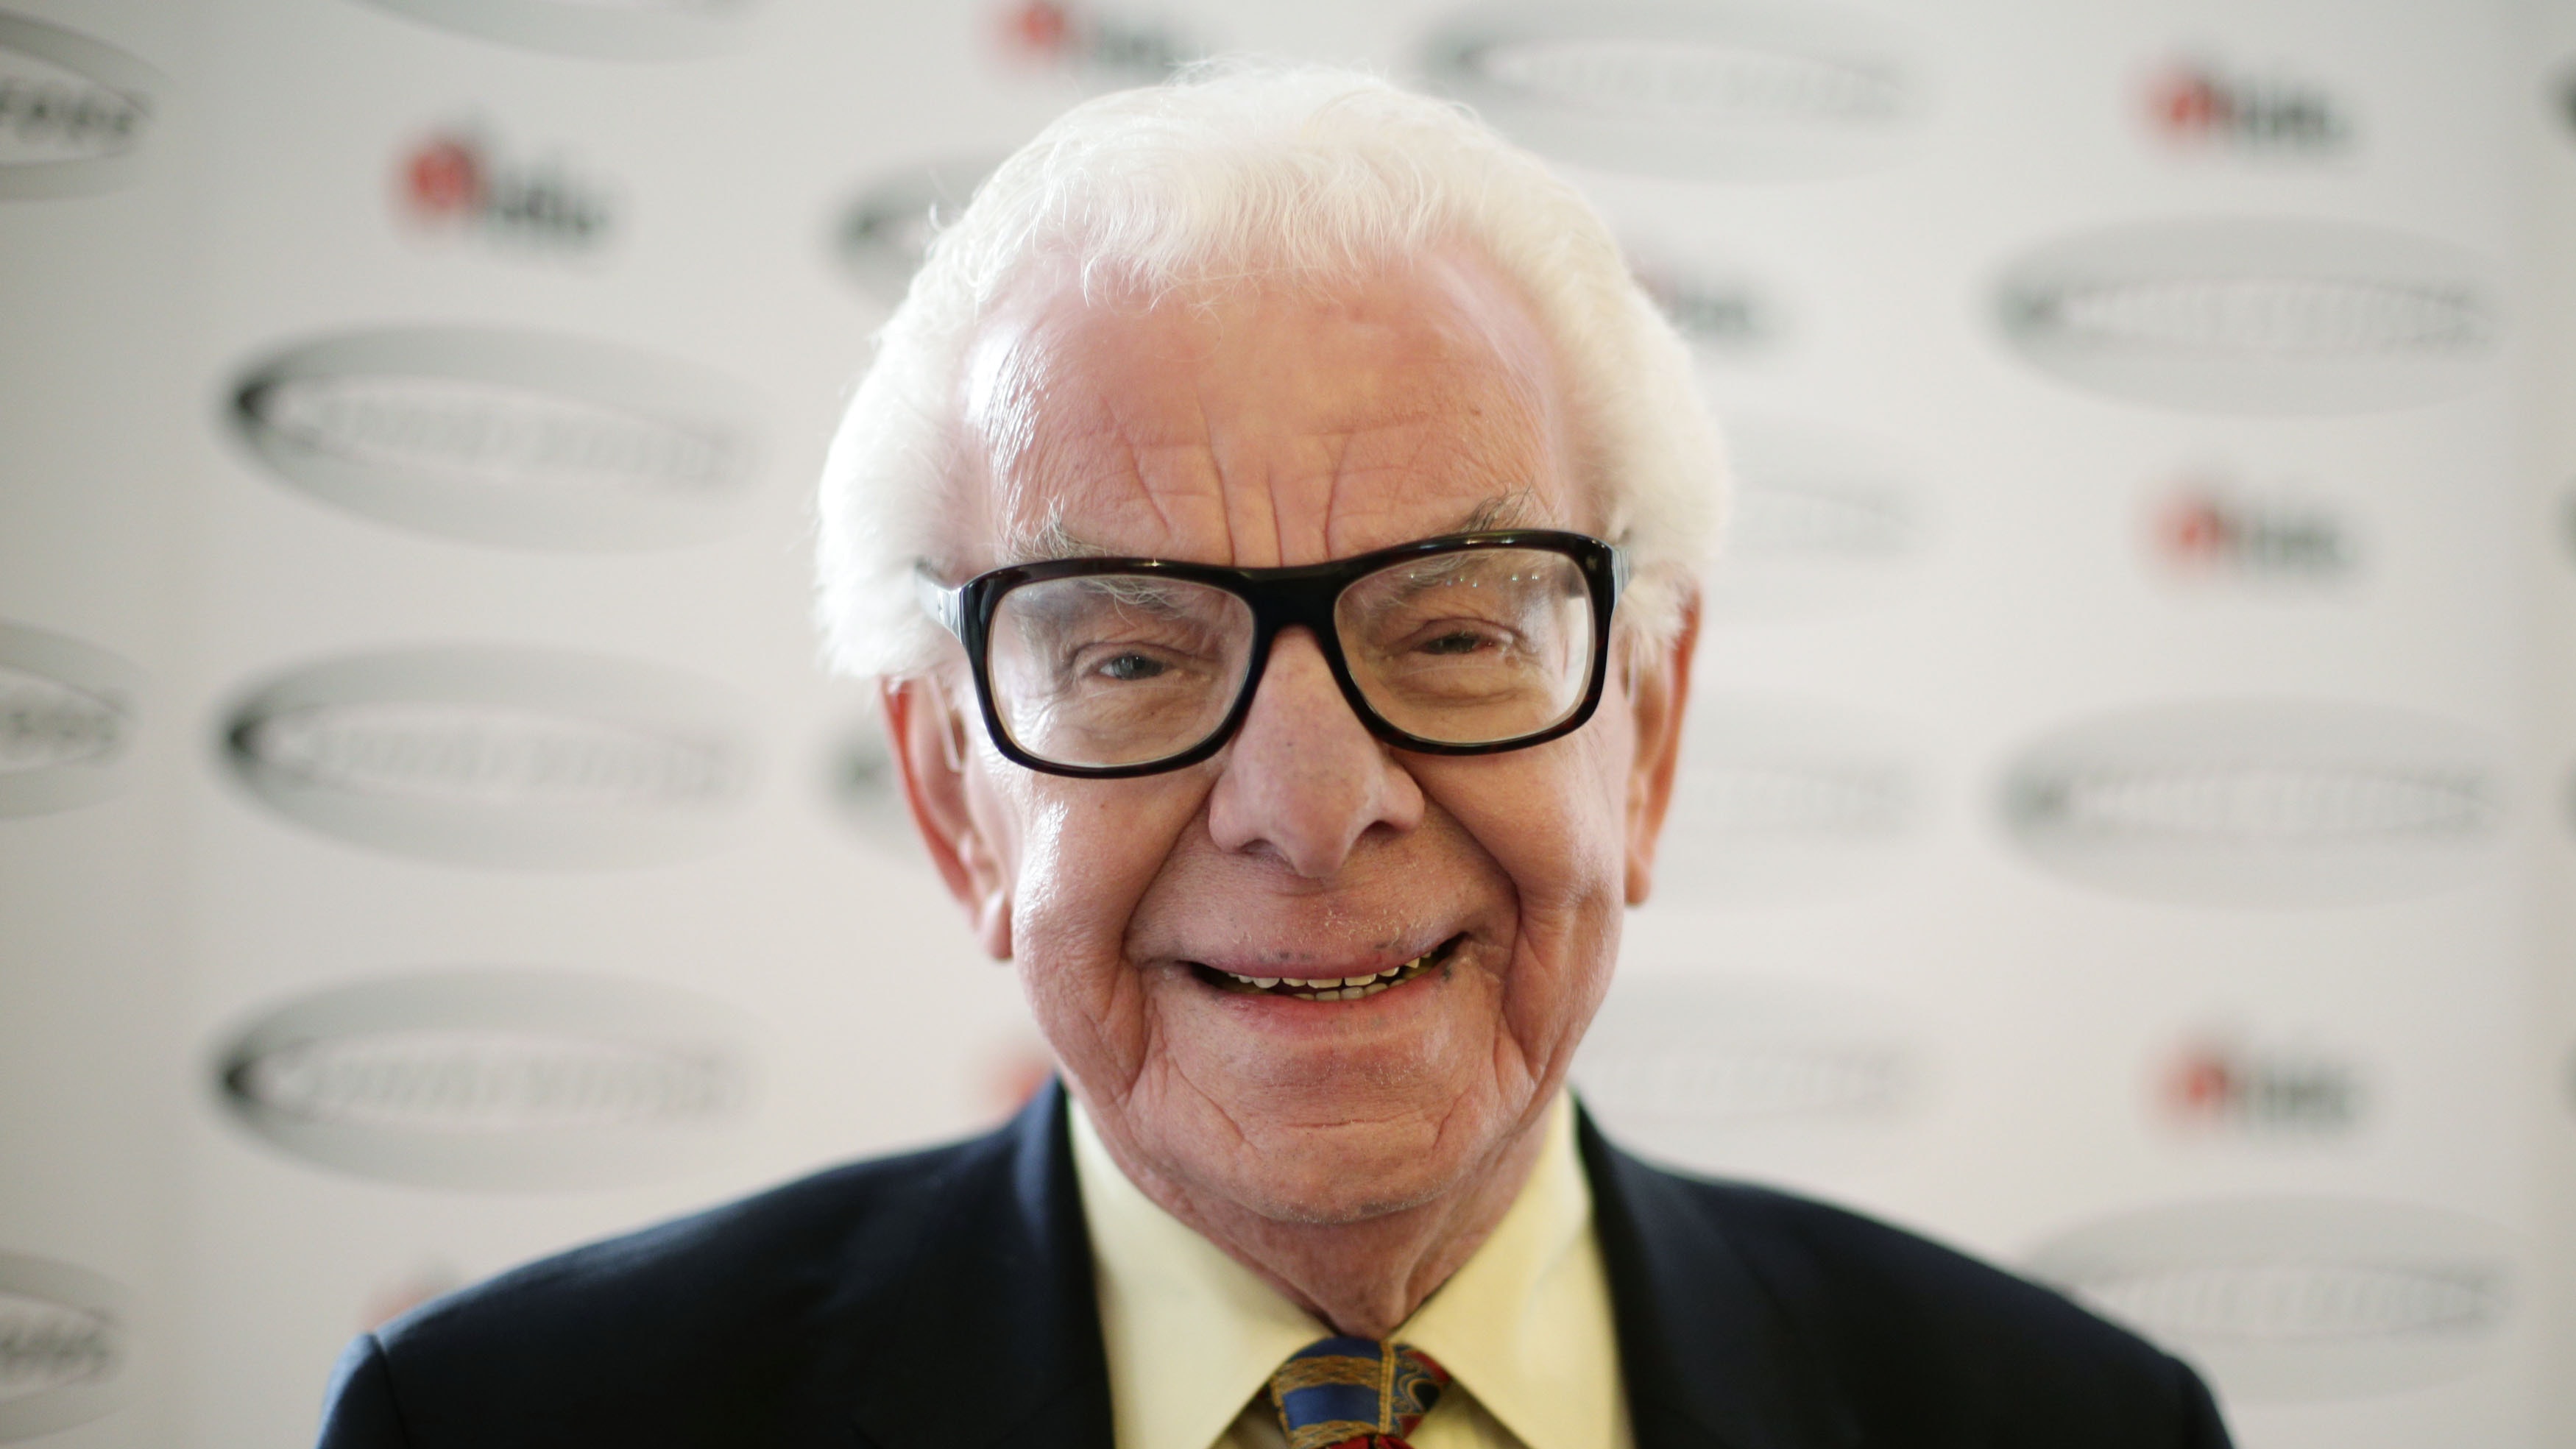 barry cryer - photo #3